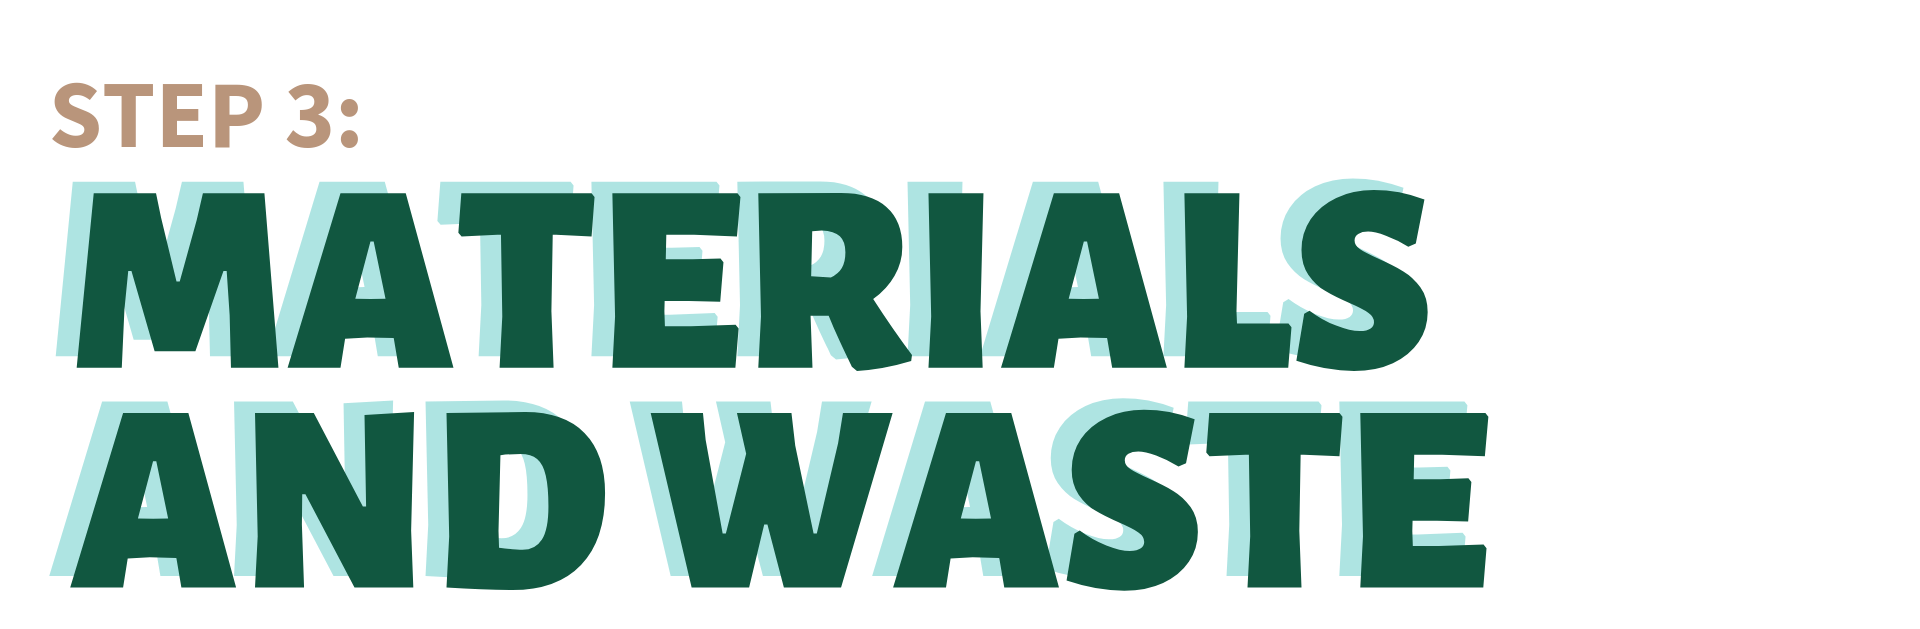 step3-materials-and-waste.png